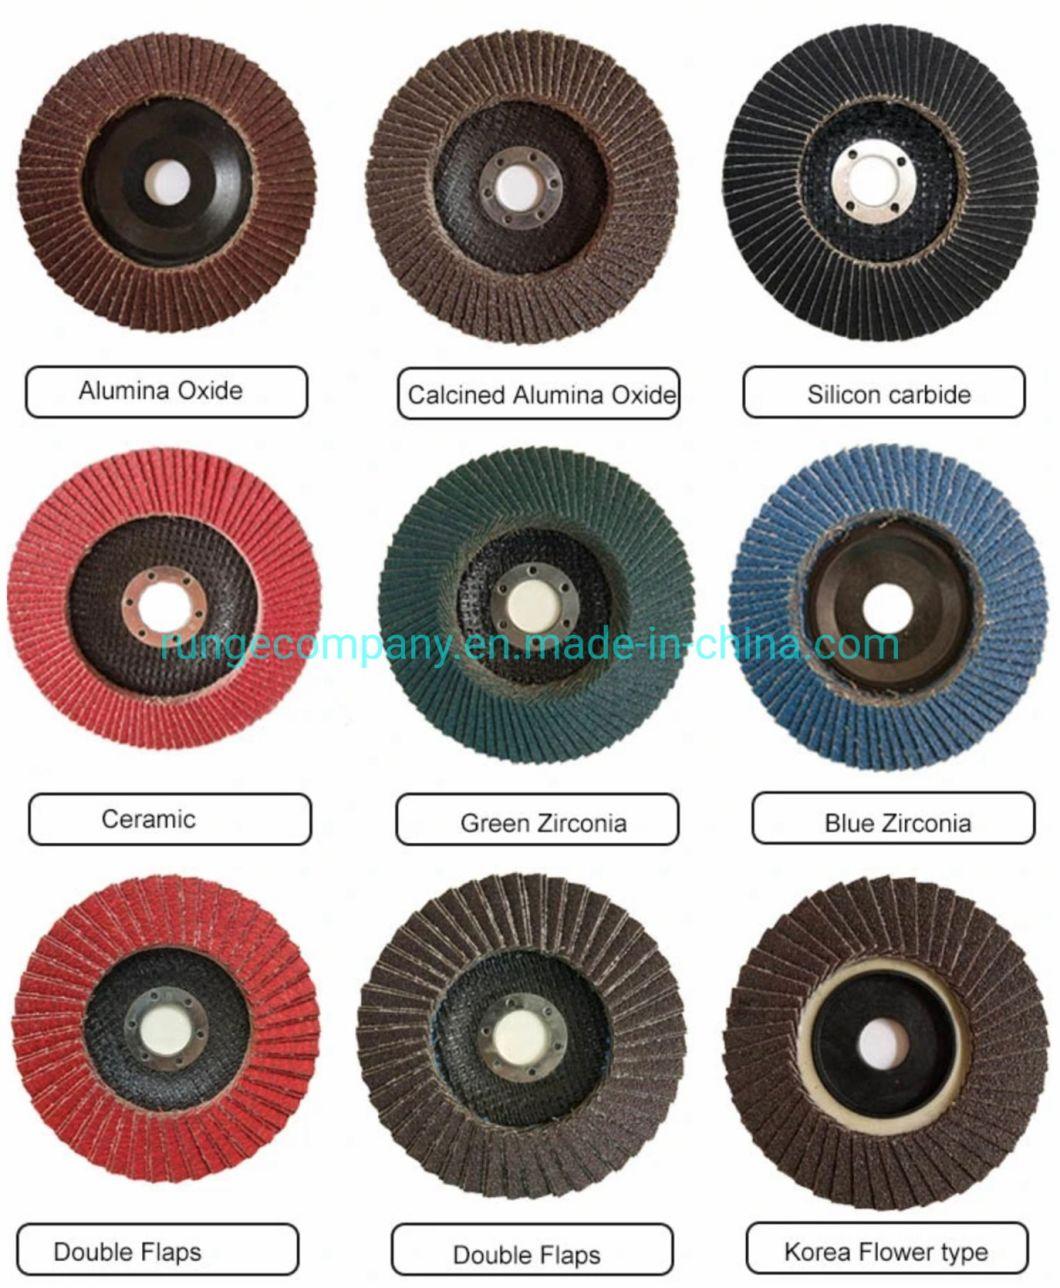 Power Electric Tools Accessories 3inch Metal Cutting Disc Cut off Wheels for Inox, Metals